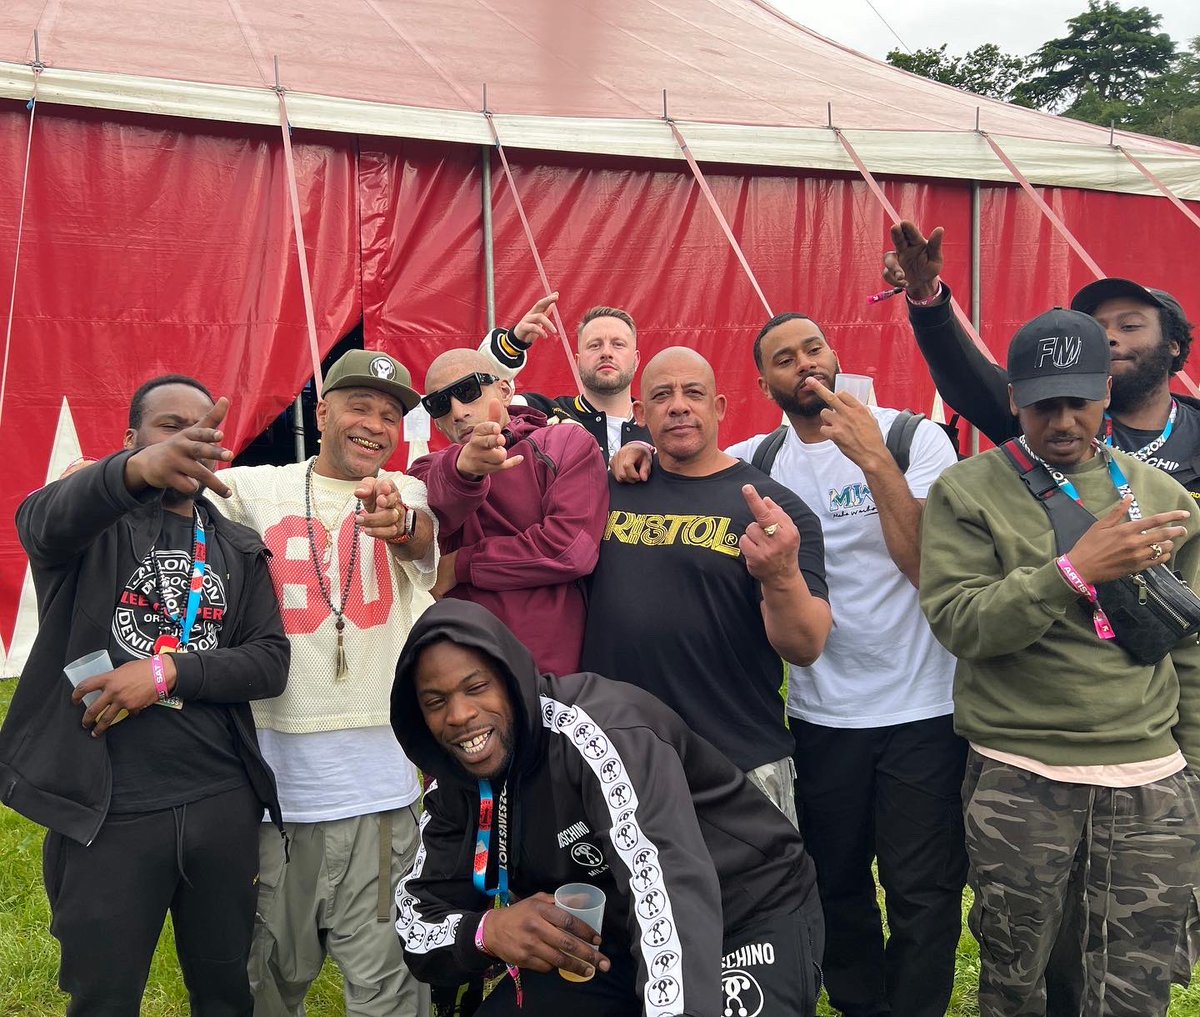 LOVE SAVES THE DAY Big Shout Out to @MRGOLDIE, @casisdead, Team Love and all in attendance. 🖤More Love❤️More Life💛More Fire💚 Hoo Law 2024